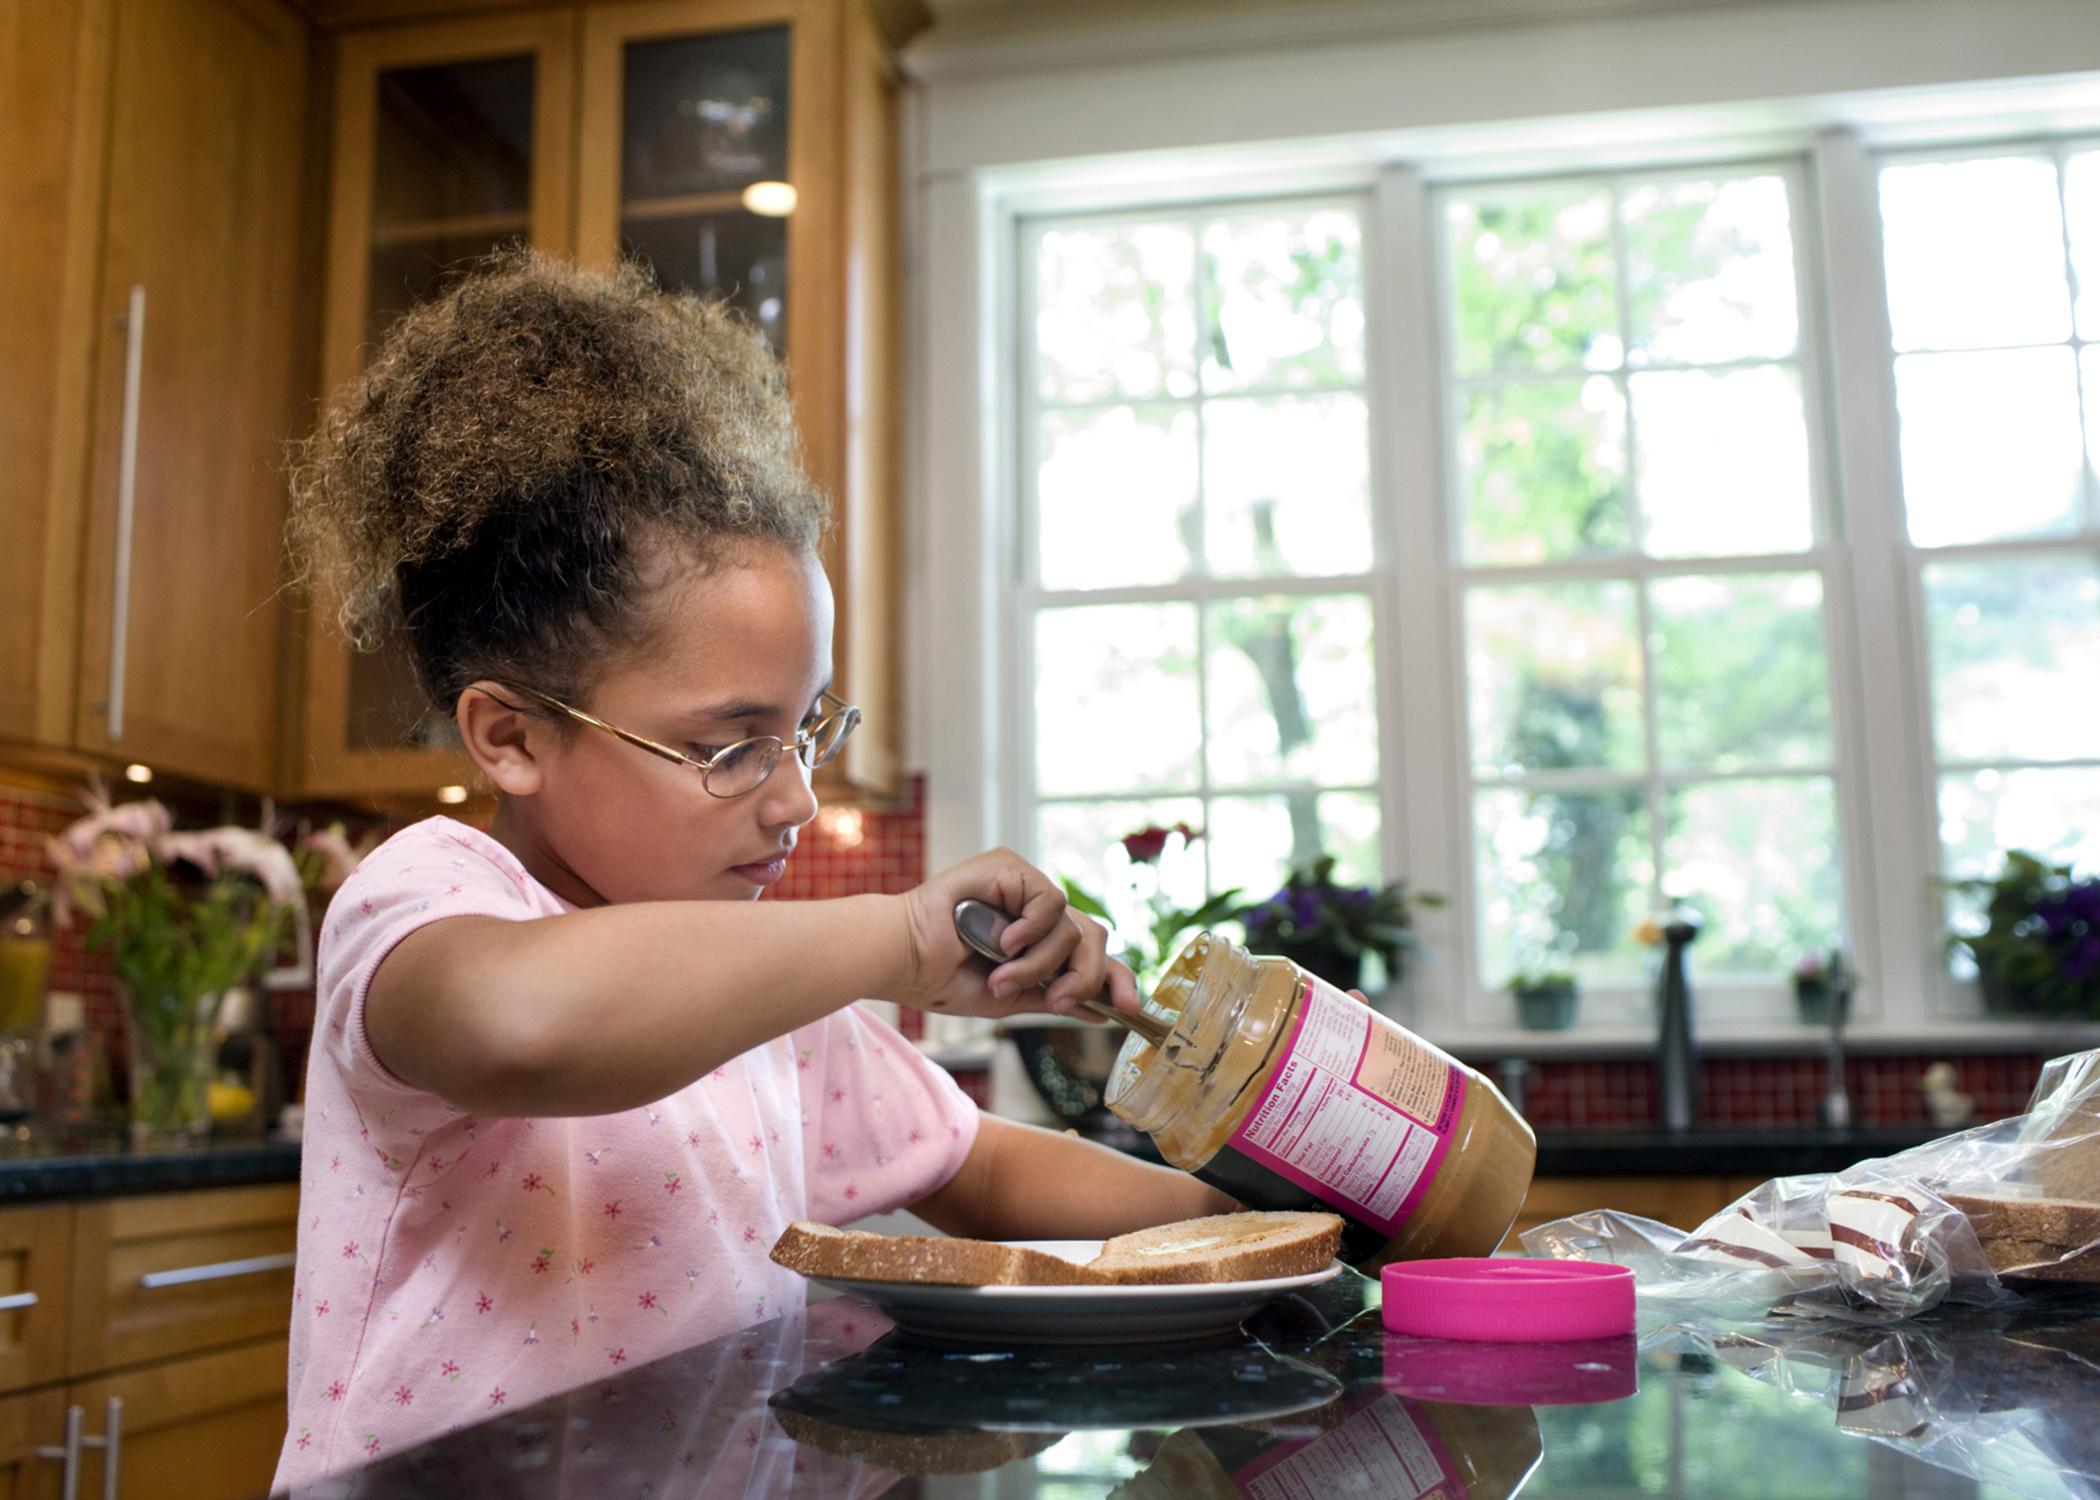 Kids can prepare easy, nutritious after-school snacks with little or no cooking when parents plan ahead. (Photo by Lifesize)